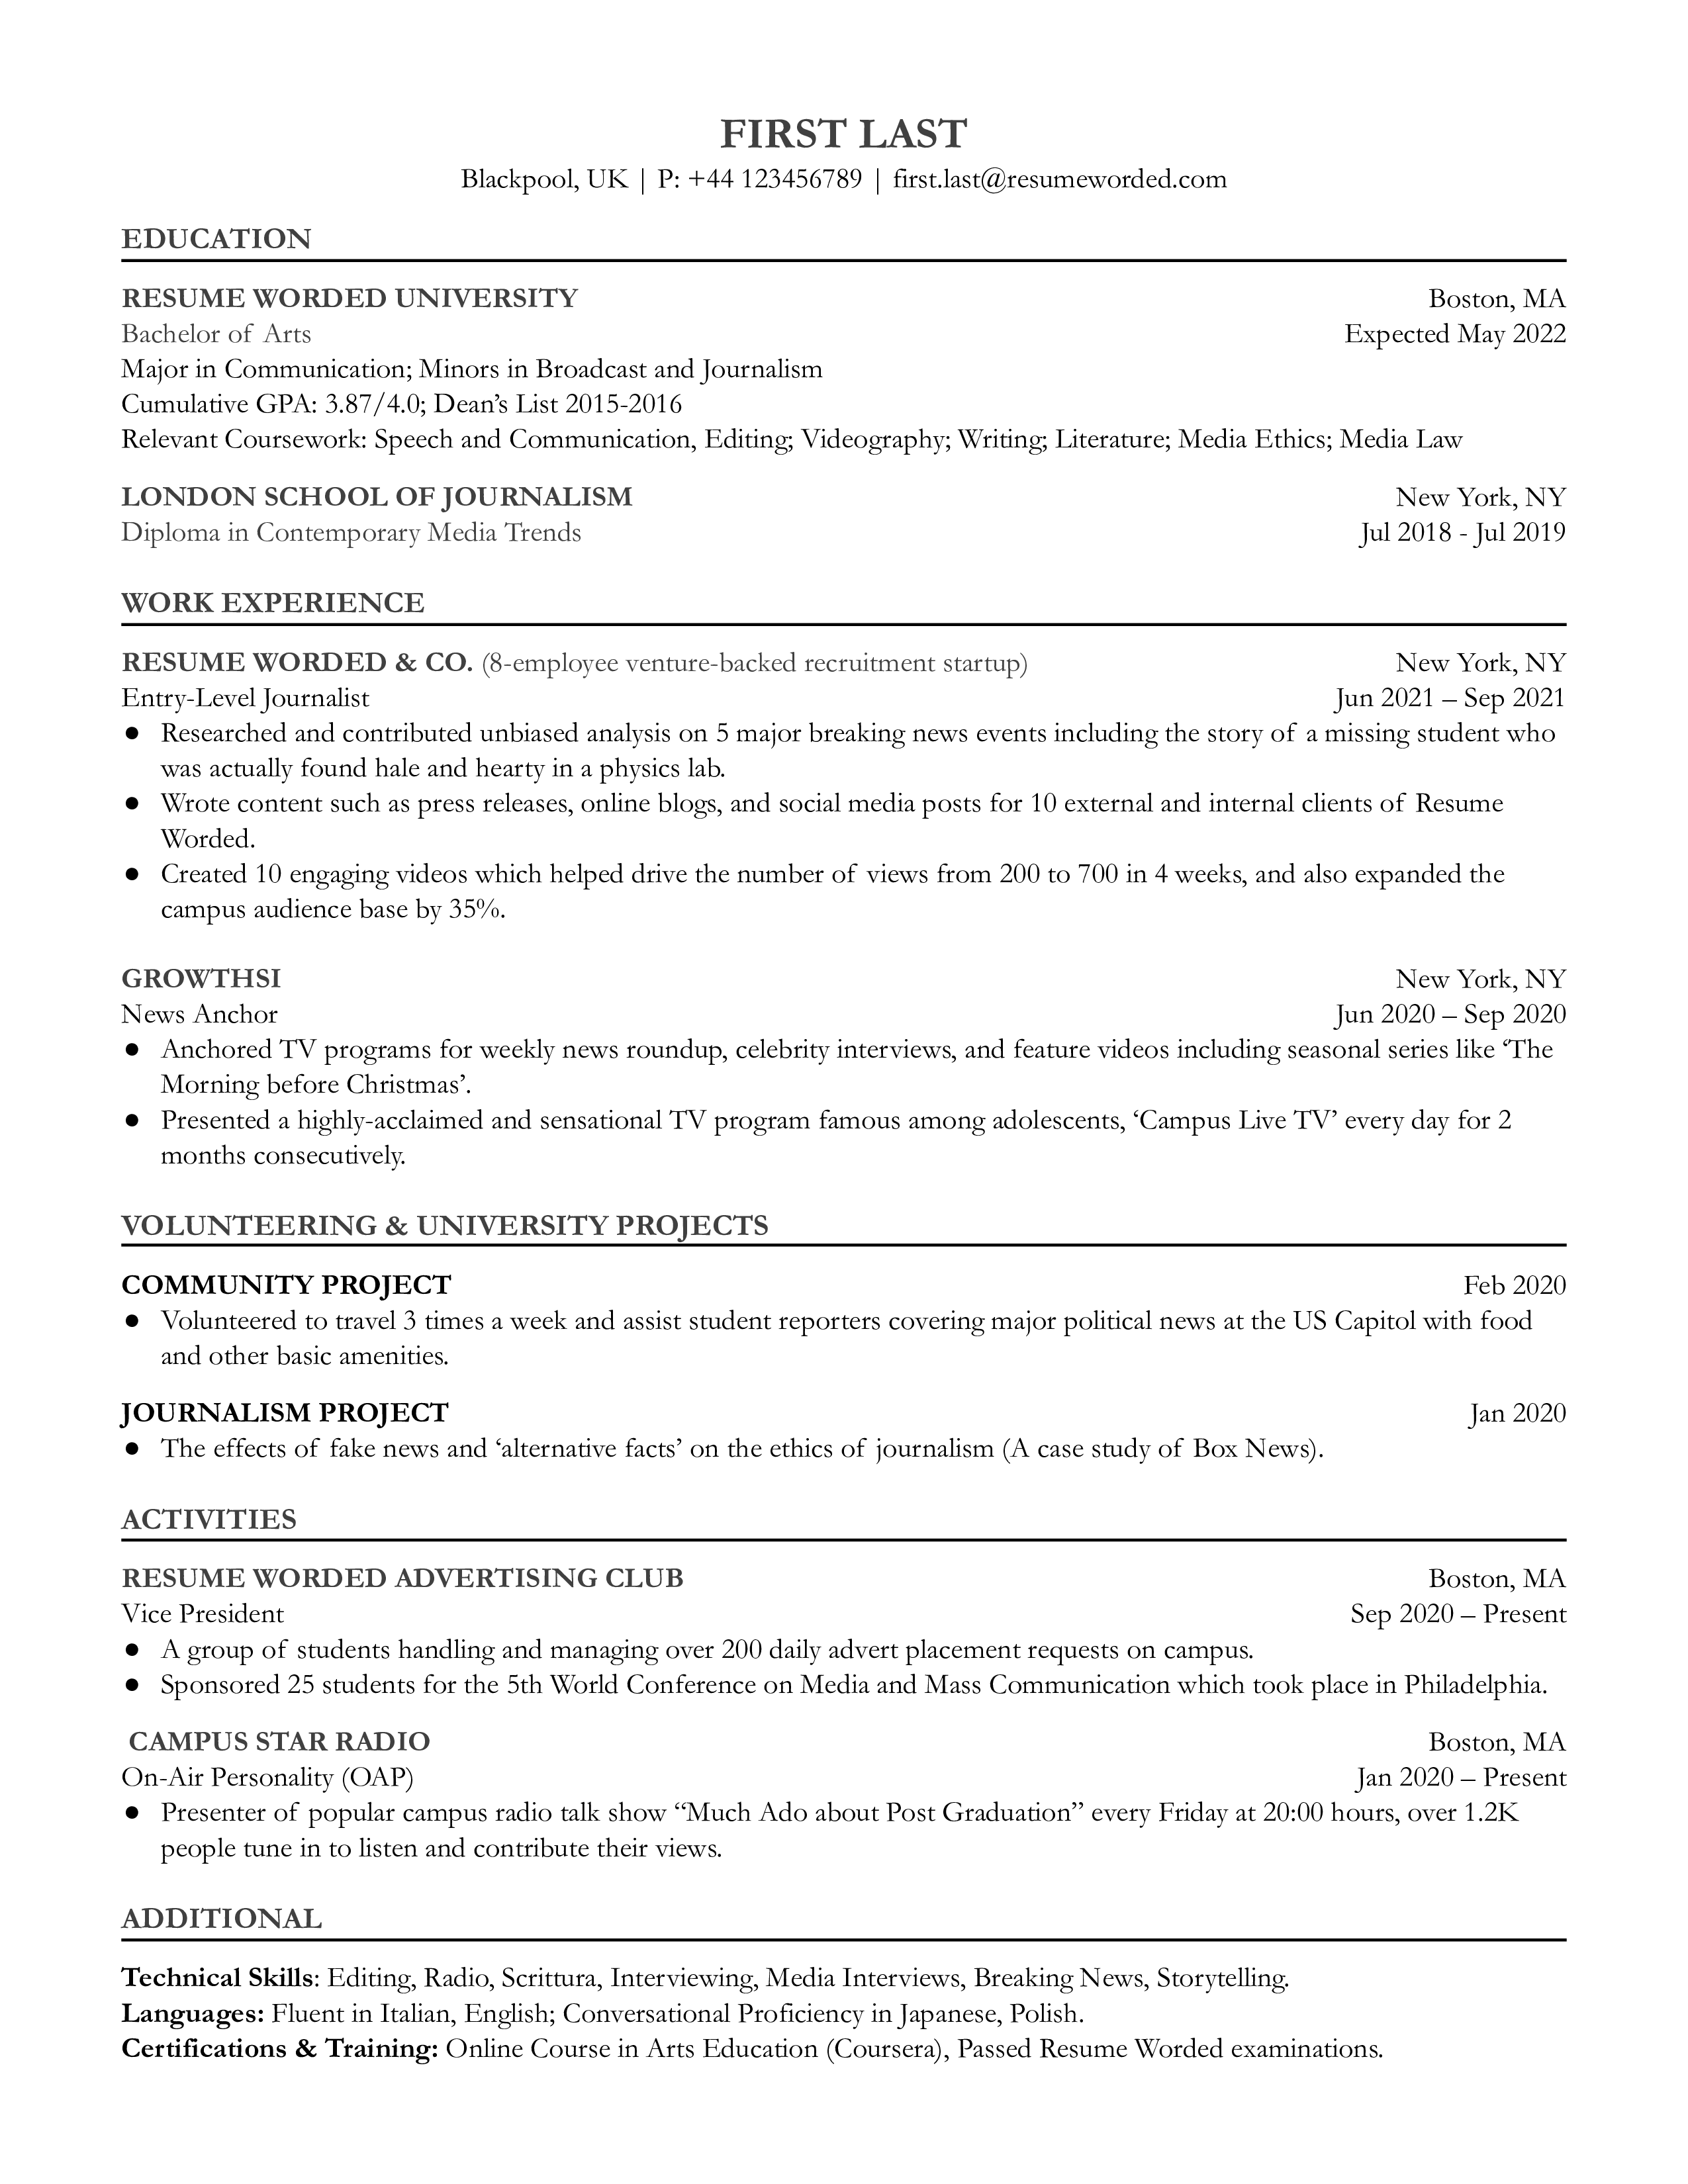 A screenshot of a CV for an Entry-Level Journalist showcasing digital skills and links to published works.